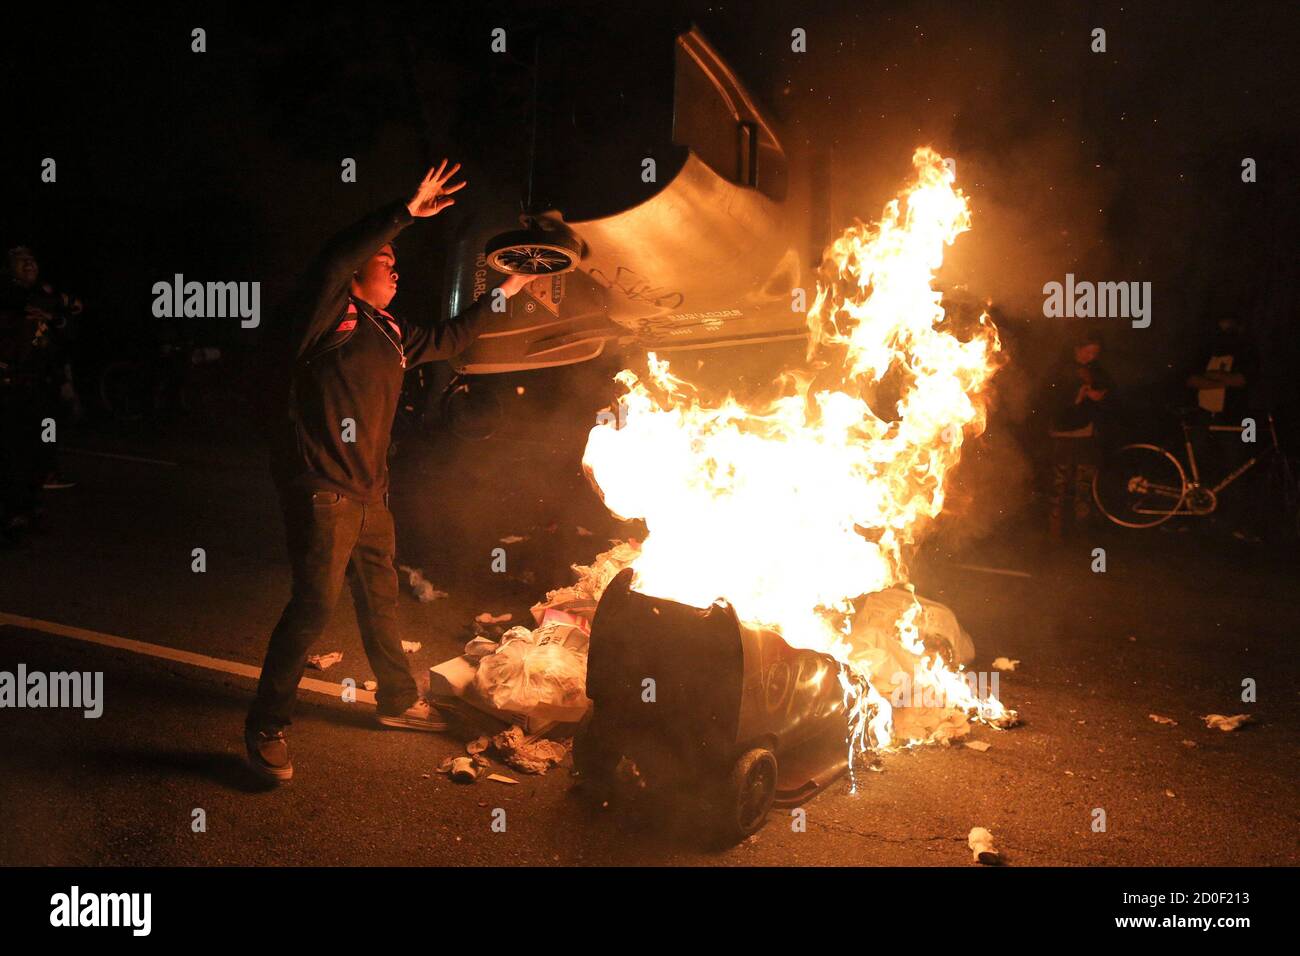 A protester throws a trash can on a fire during a demonstration in Oakland, California following the grand jury decision in the shooting of Michael Brown in Ferguson, Missouri November 24, 2014. Protests were also staged in New York, Chicago, Washington, D.C. and Seattle over the case that has highlighted long-standing racial tensions not just in predominantly black Ferguson but across the United States. REUTERS/Elijah Nouvelage (UNITED STATES - Tags: CIVIL UNREST) Stock Photo